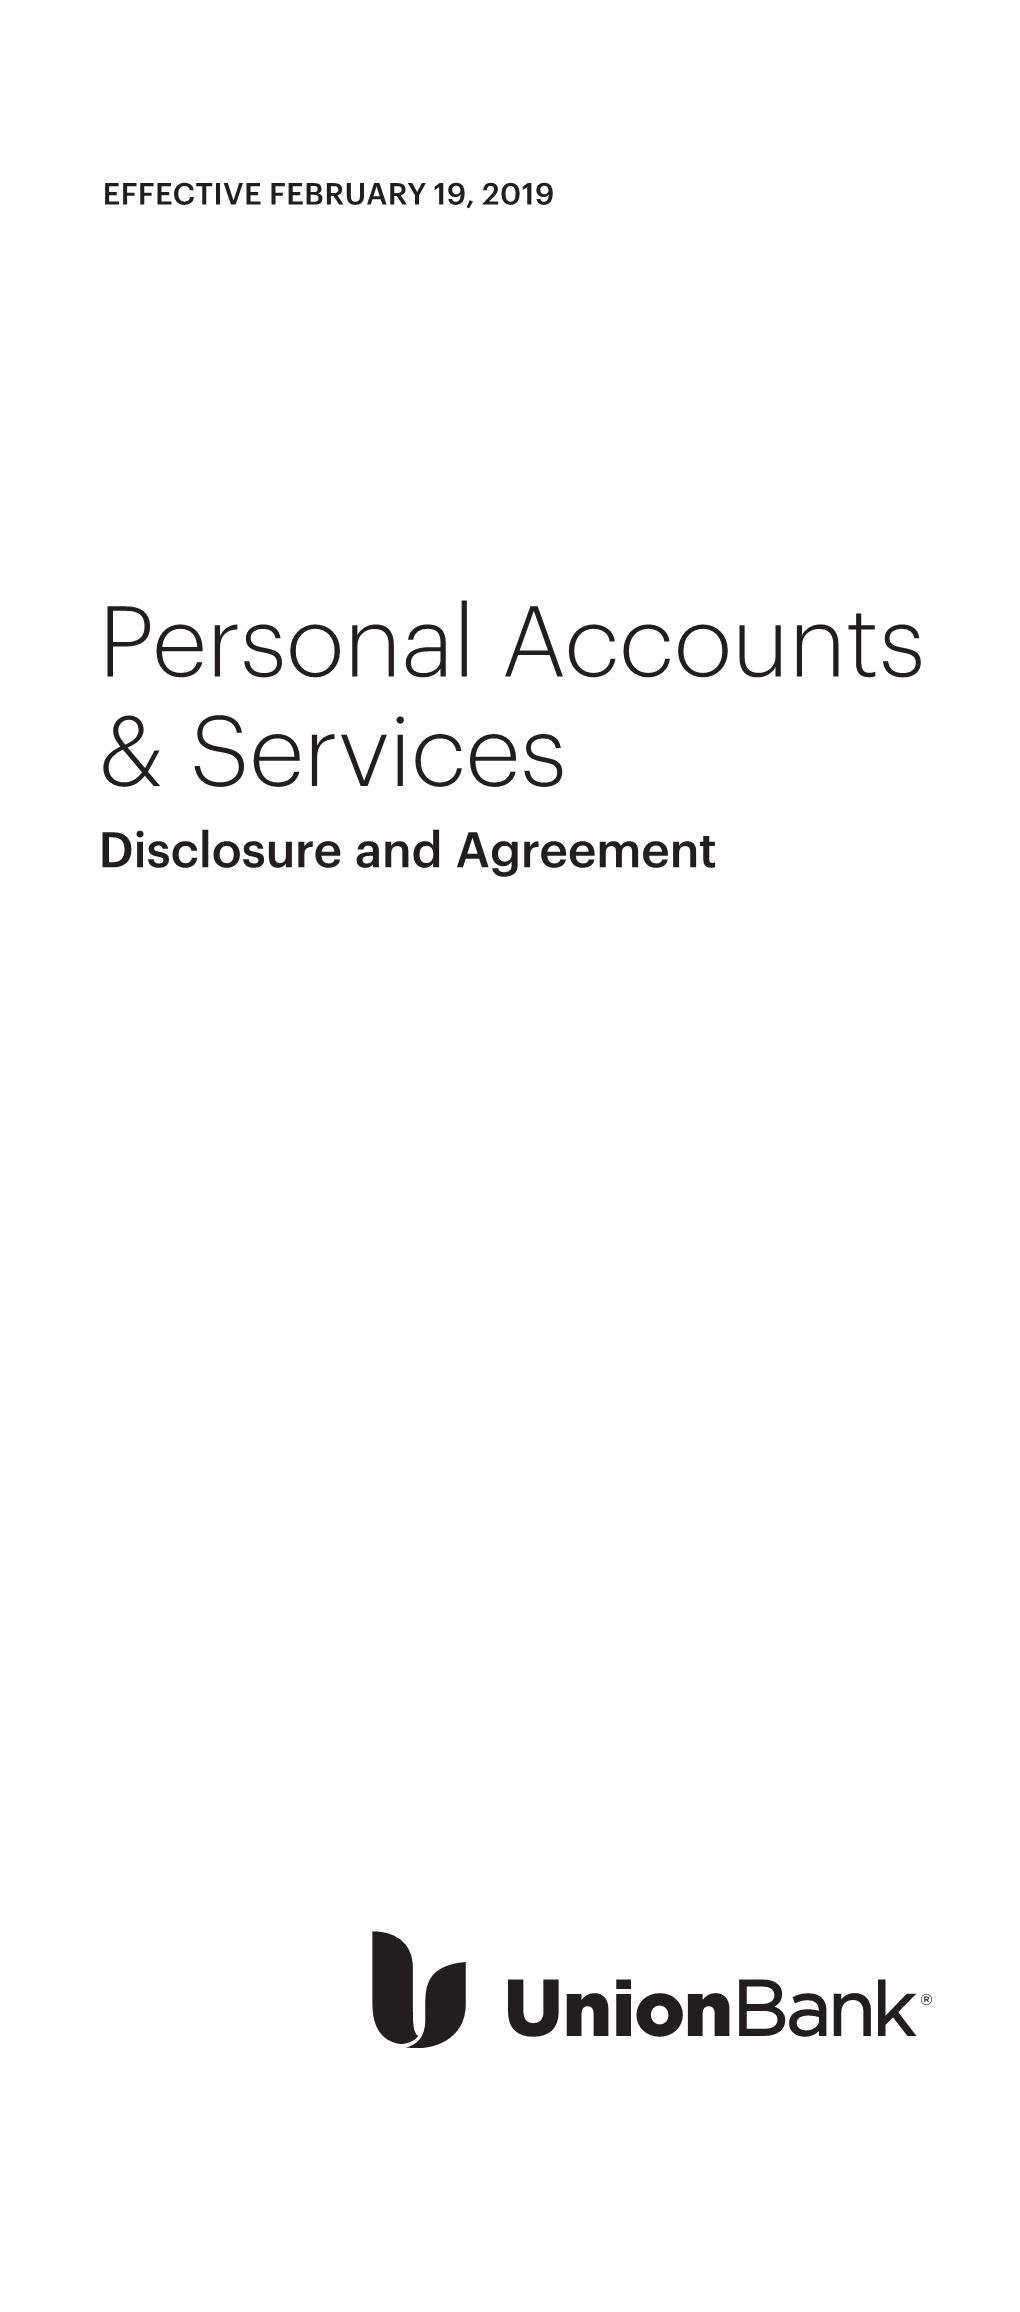 Personal Accounts & Services